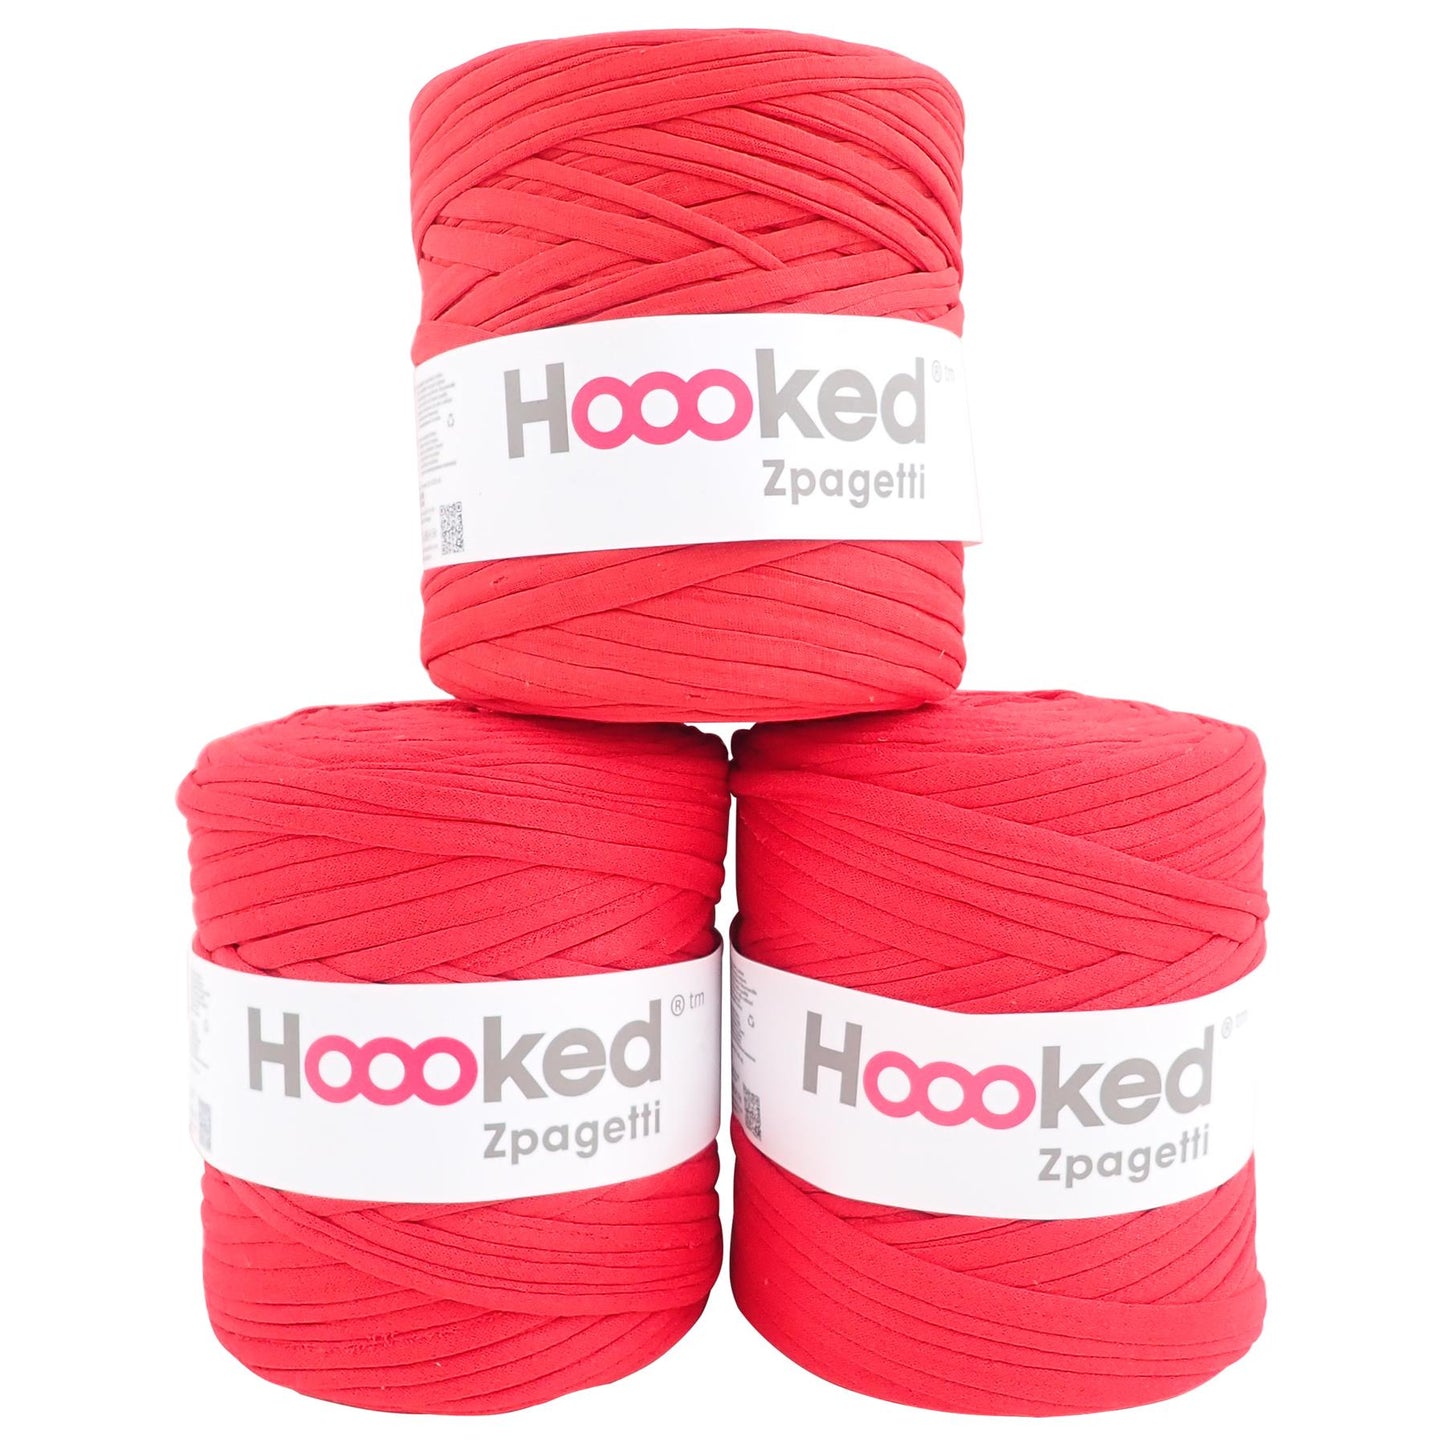 Hoooked Zpagetti Red Cotton T-Shirt Yarn - 120M 700g (Pack of 3)